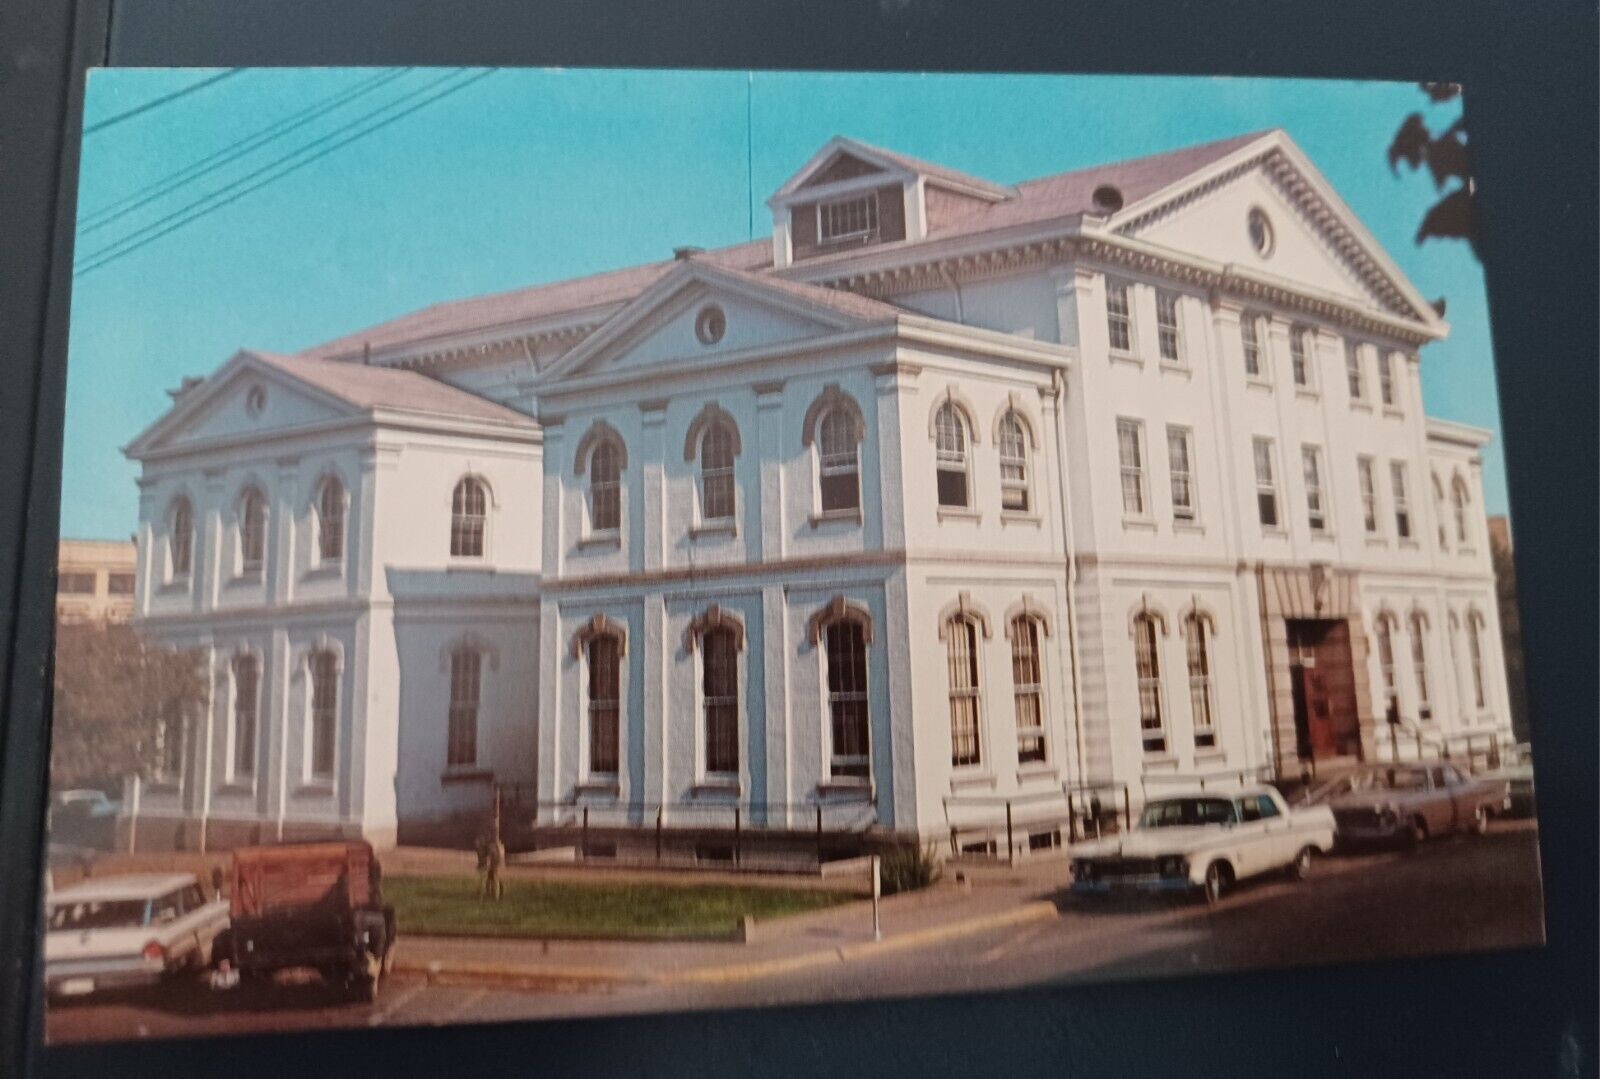 Union County Court House Morganfield Kentucky Early 1960s Cars 